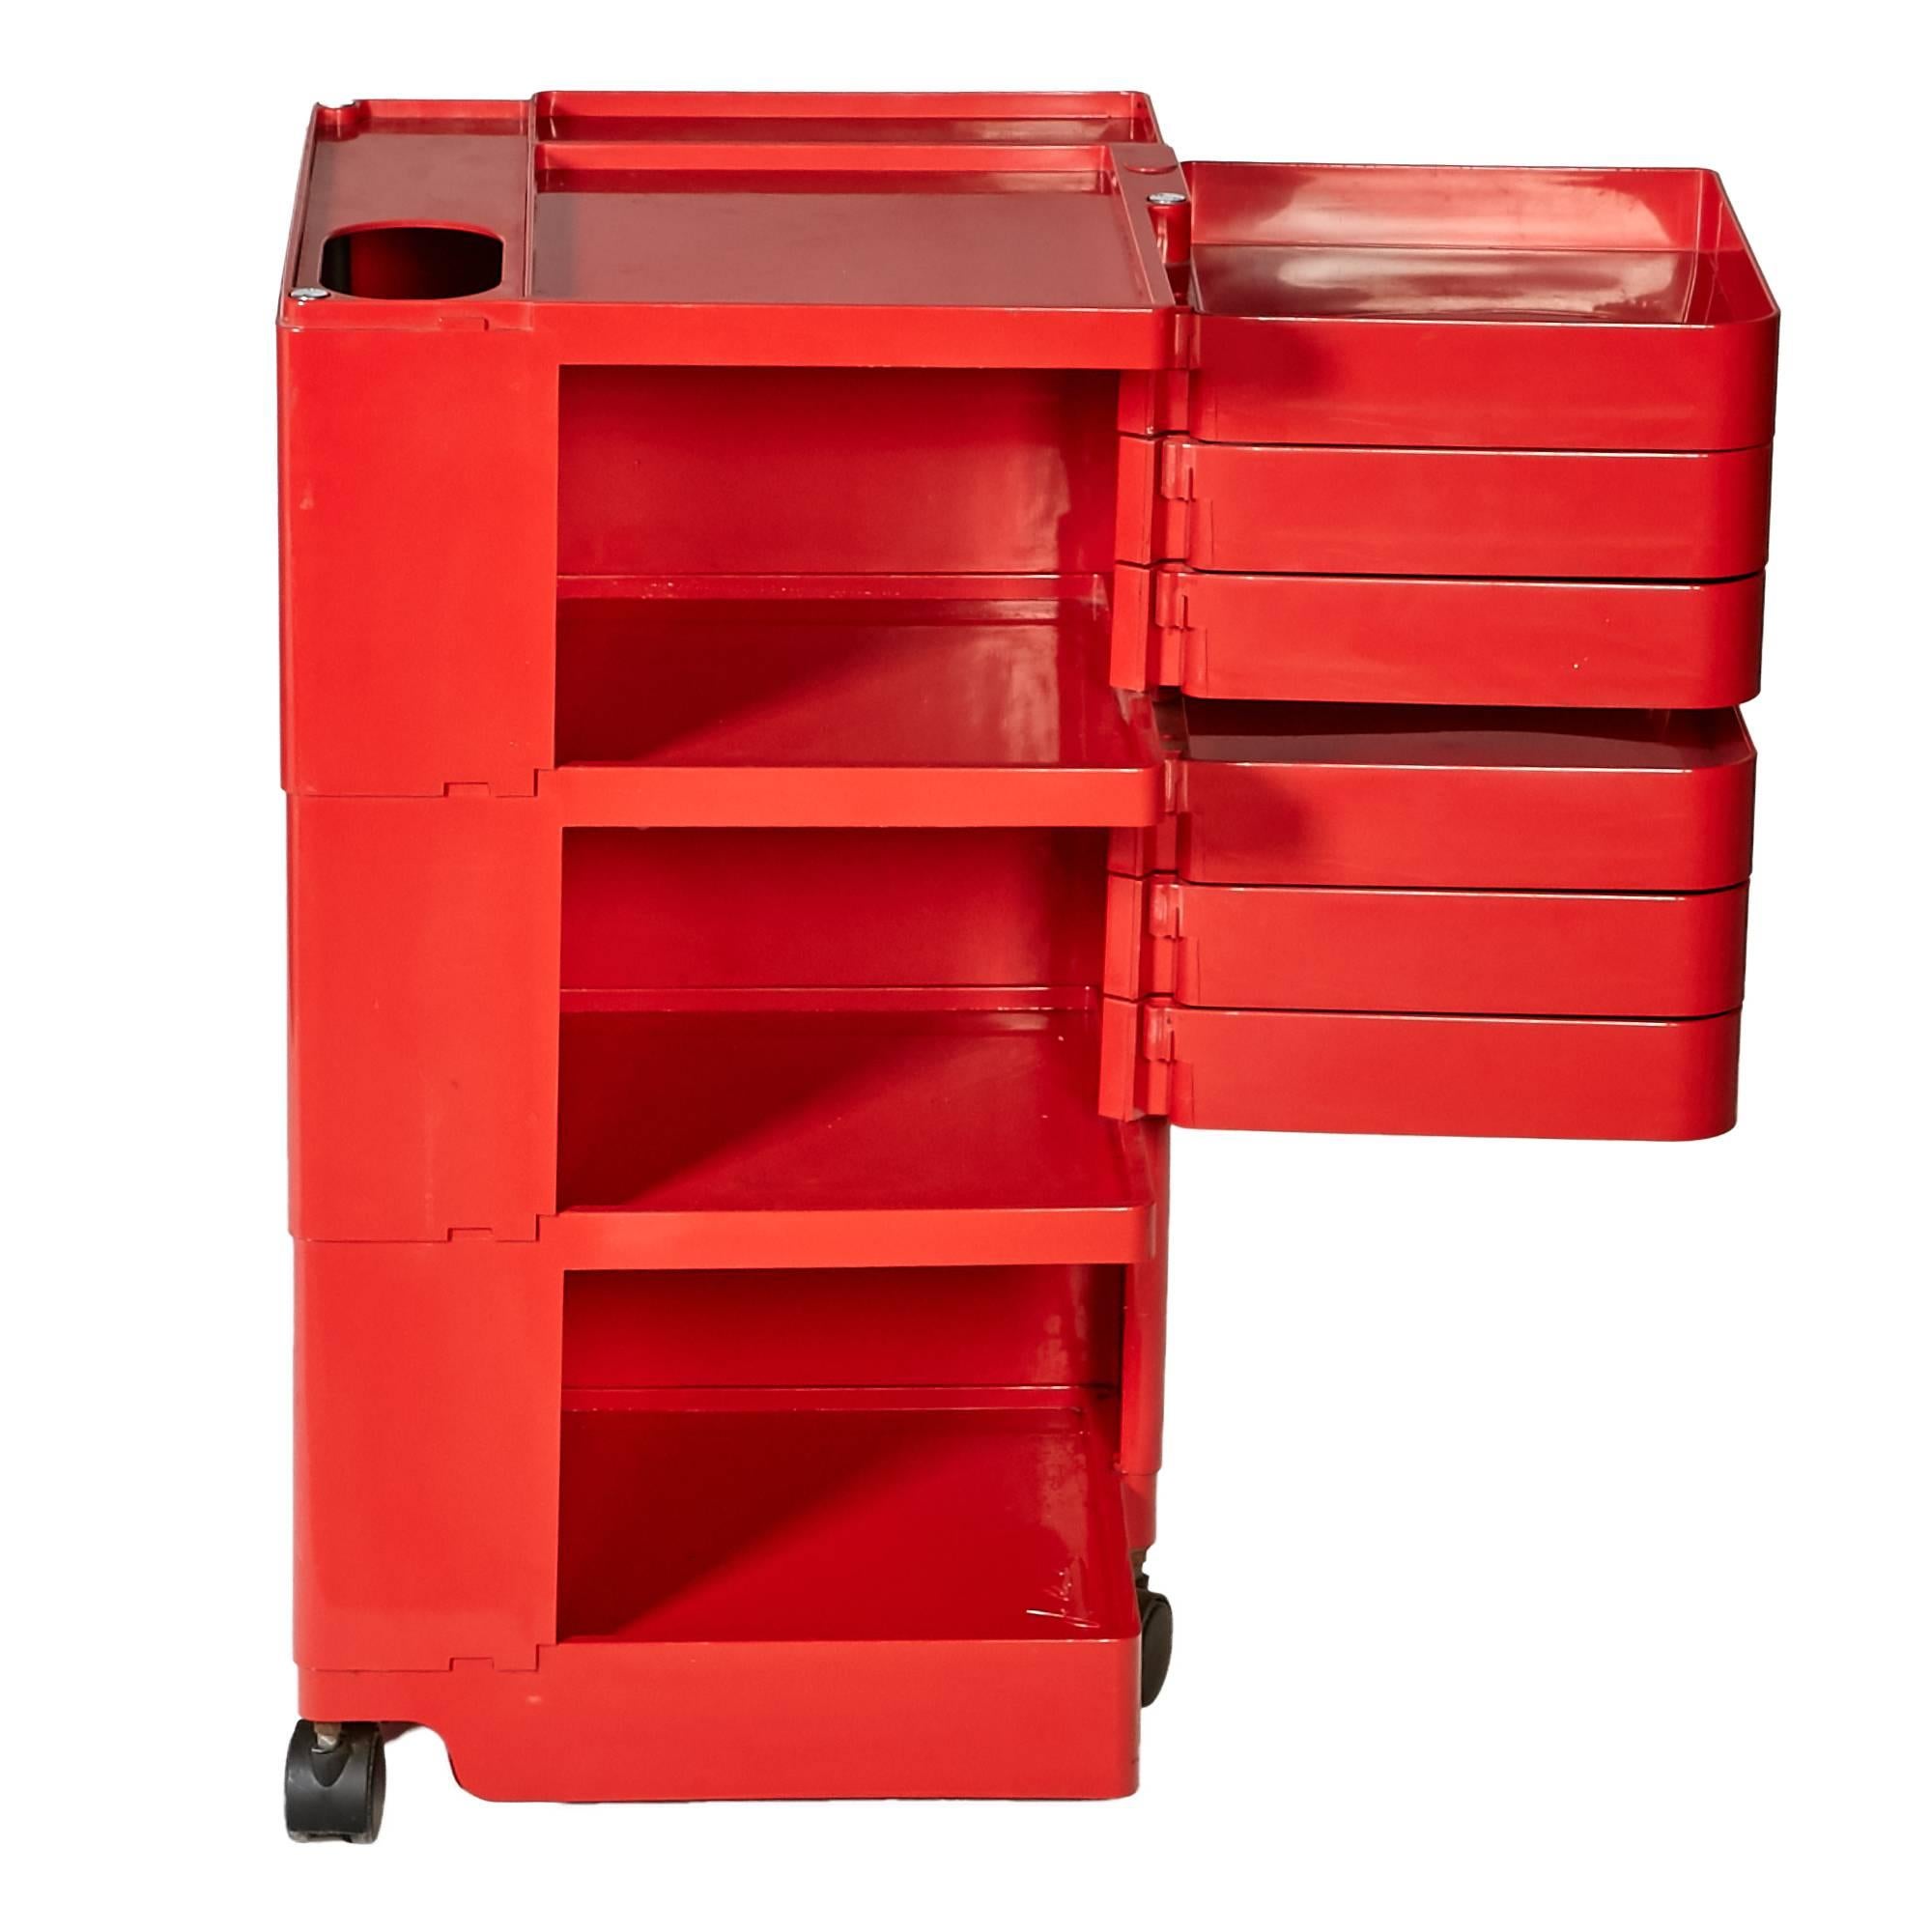 Joe Columbo red plastic Boby storage or artist rolling organizer with three sections with five swing-out trays. Designed by Joe Colombo in 1968 by B-Line, Italy.